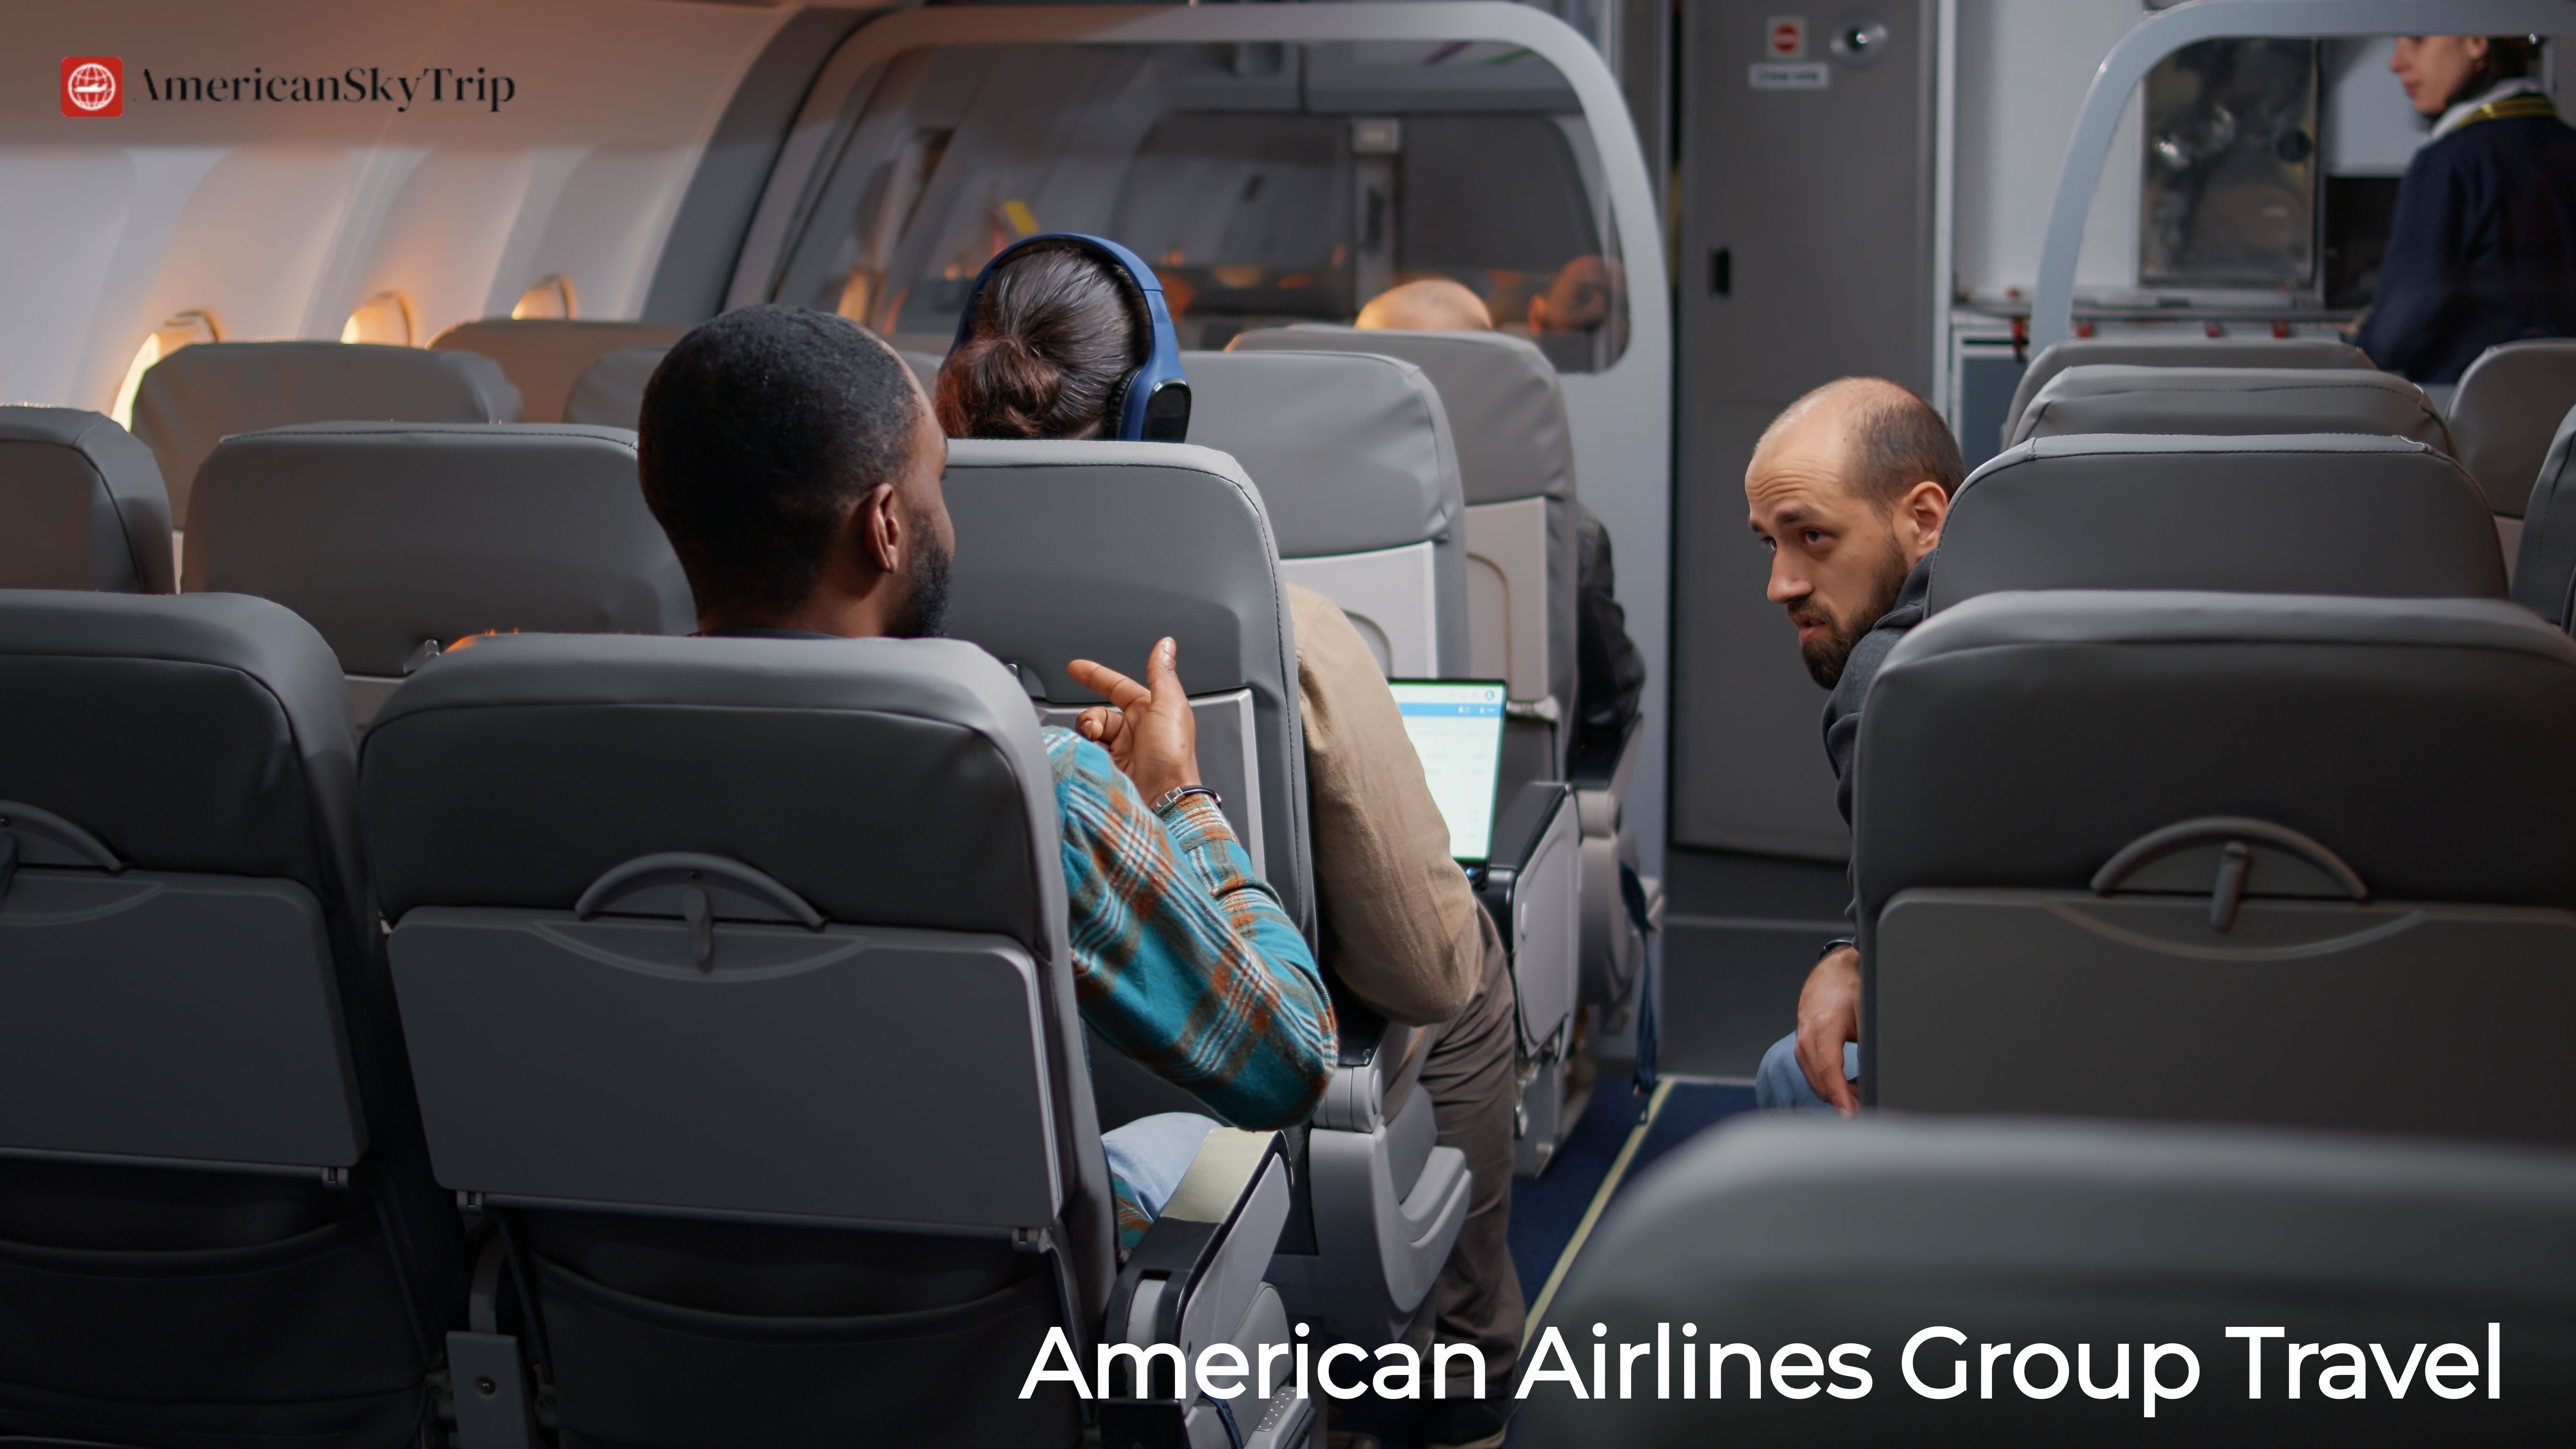 How can I Book American Airlines Group Travel?